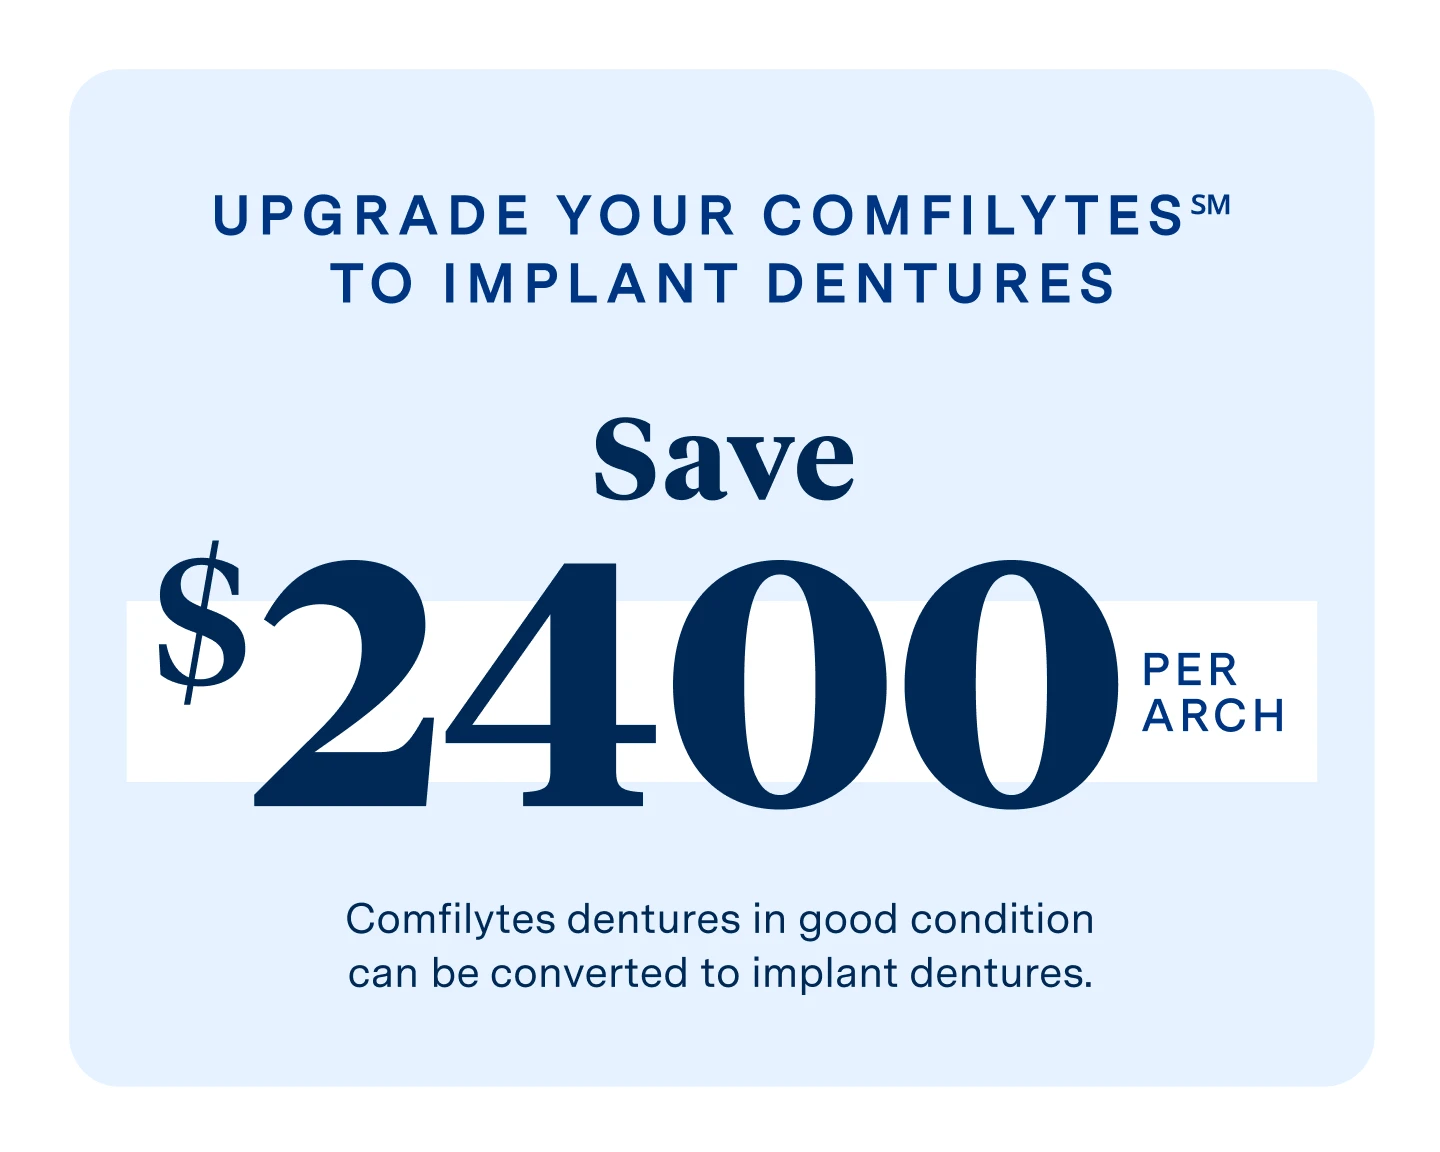 Upgrade your Comfilytes℠ and save $2400 per arch. Comfilytes℠ dentures in good condition can be converted into implant dentures.